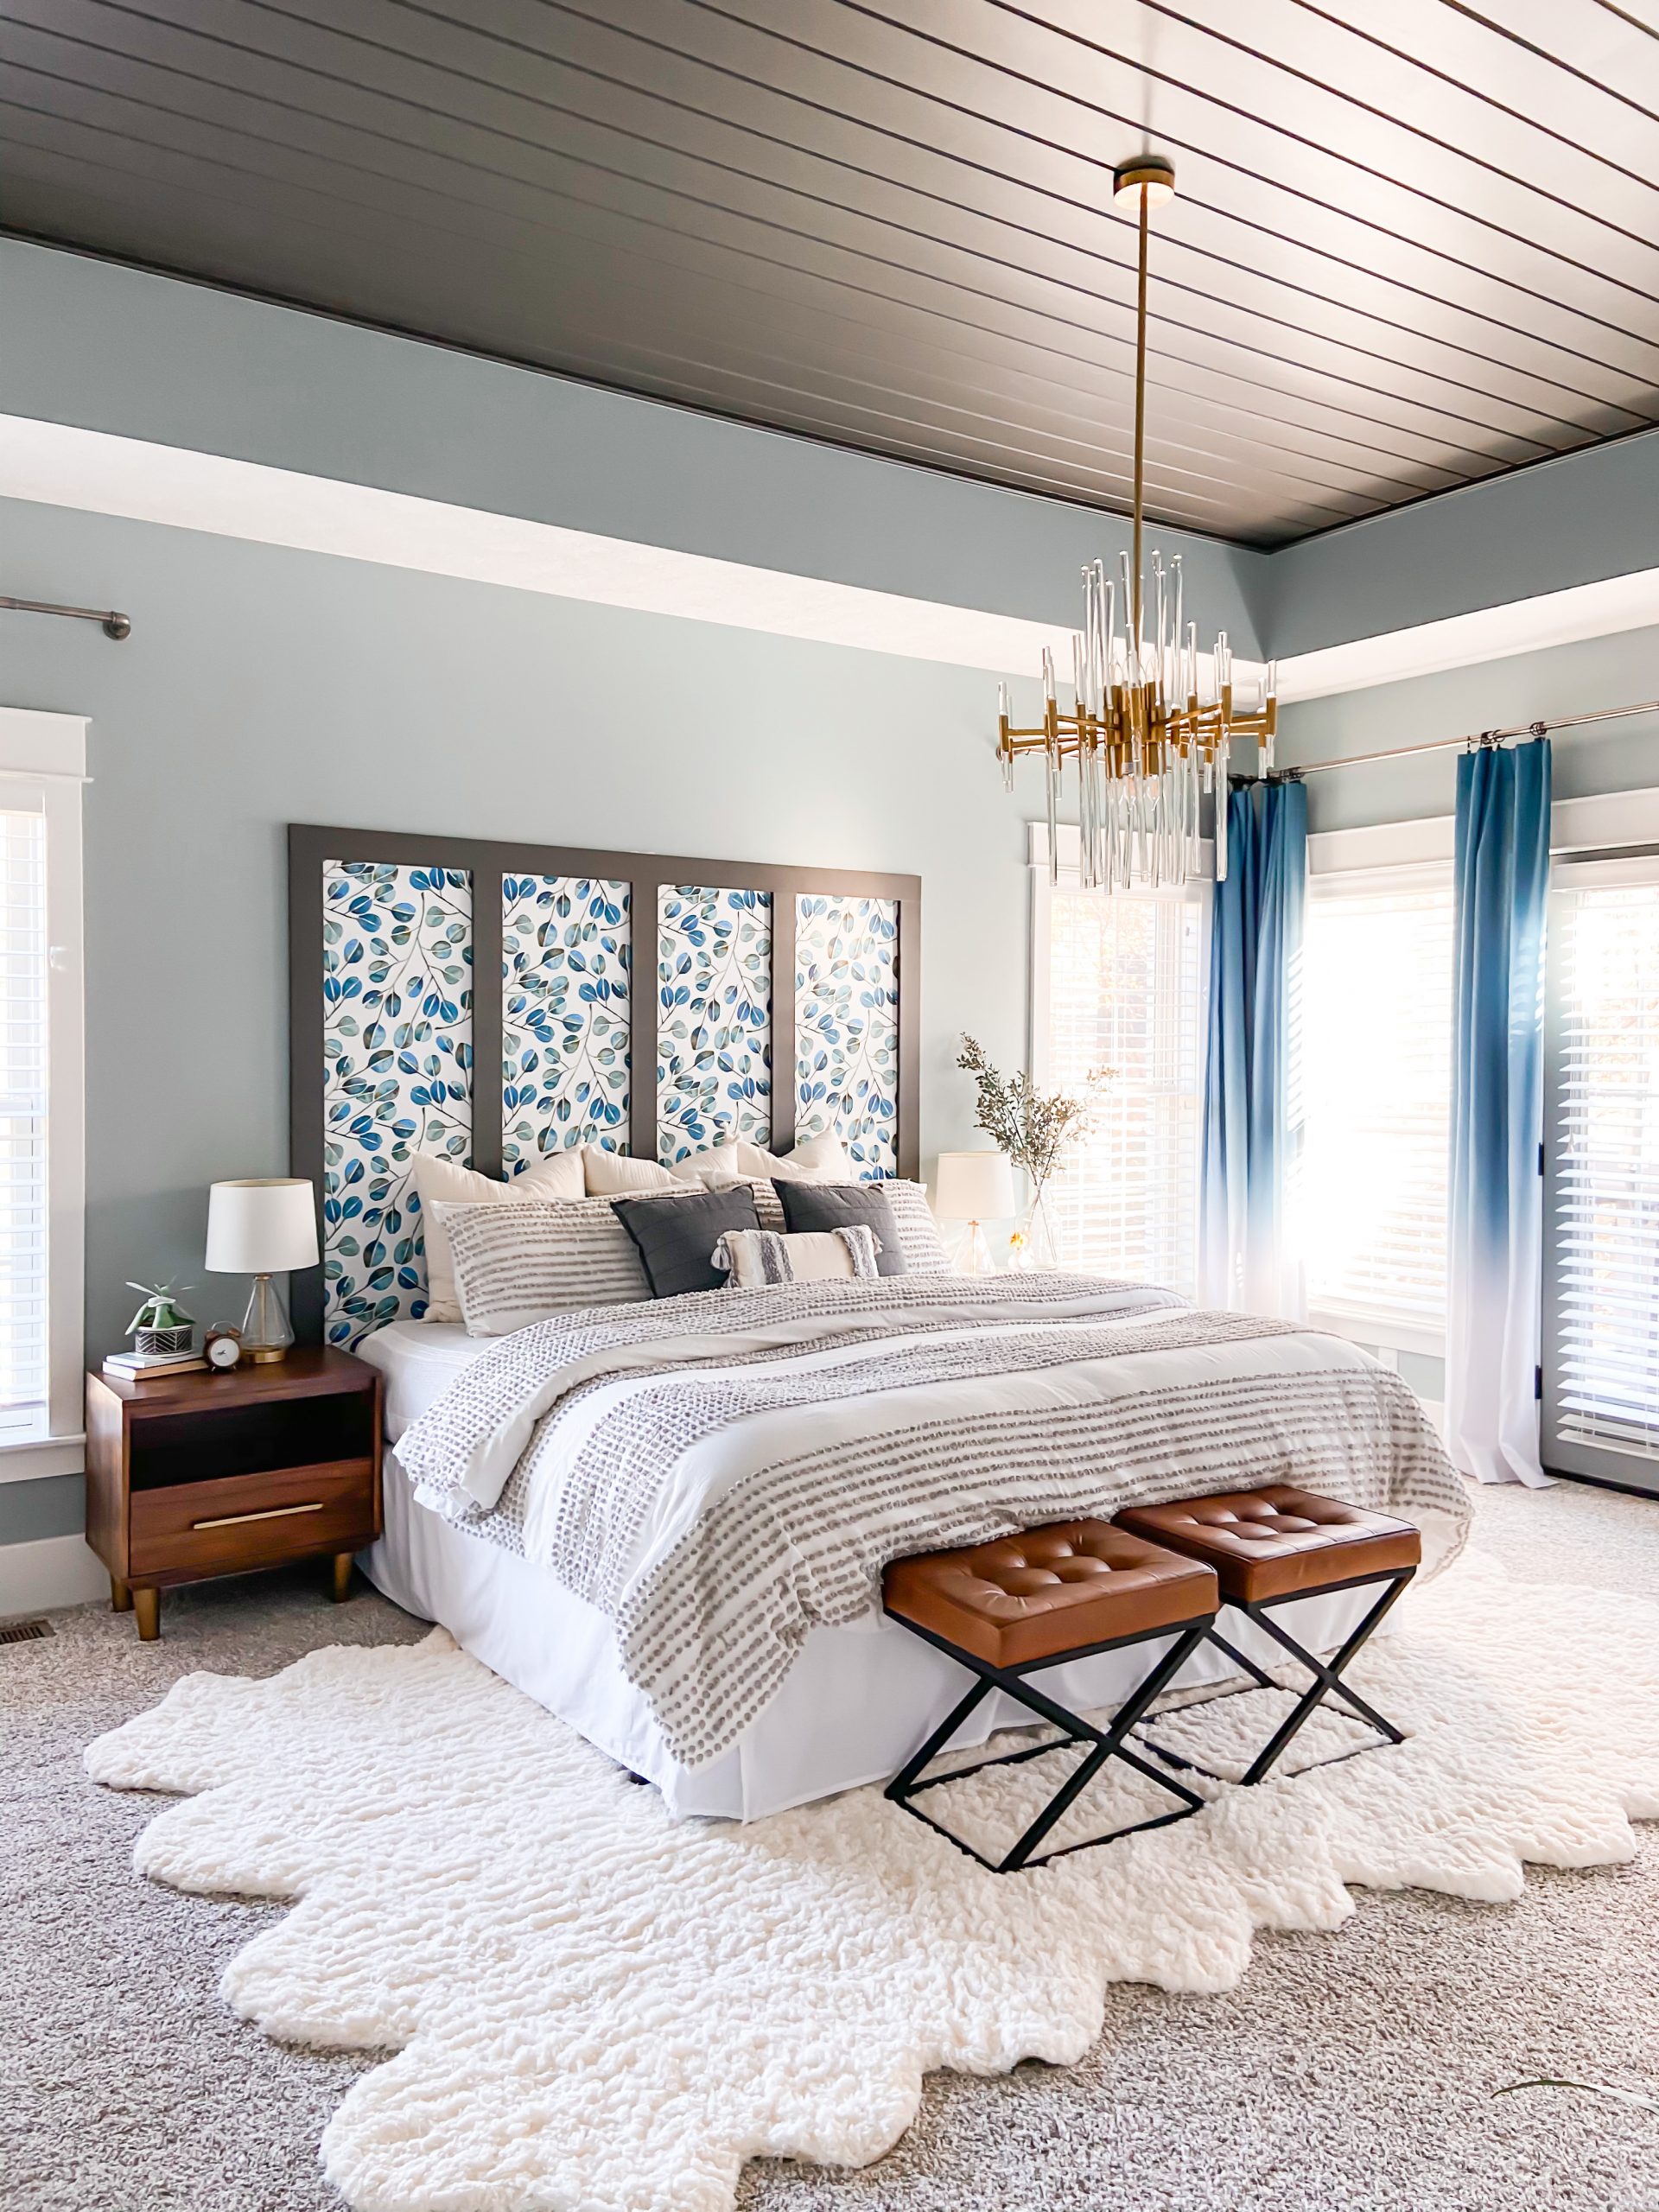 Cozy serene bedroom in blue and bronze shades